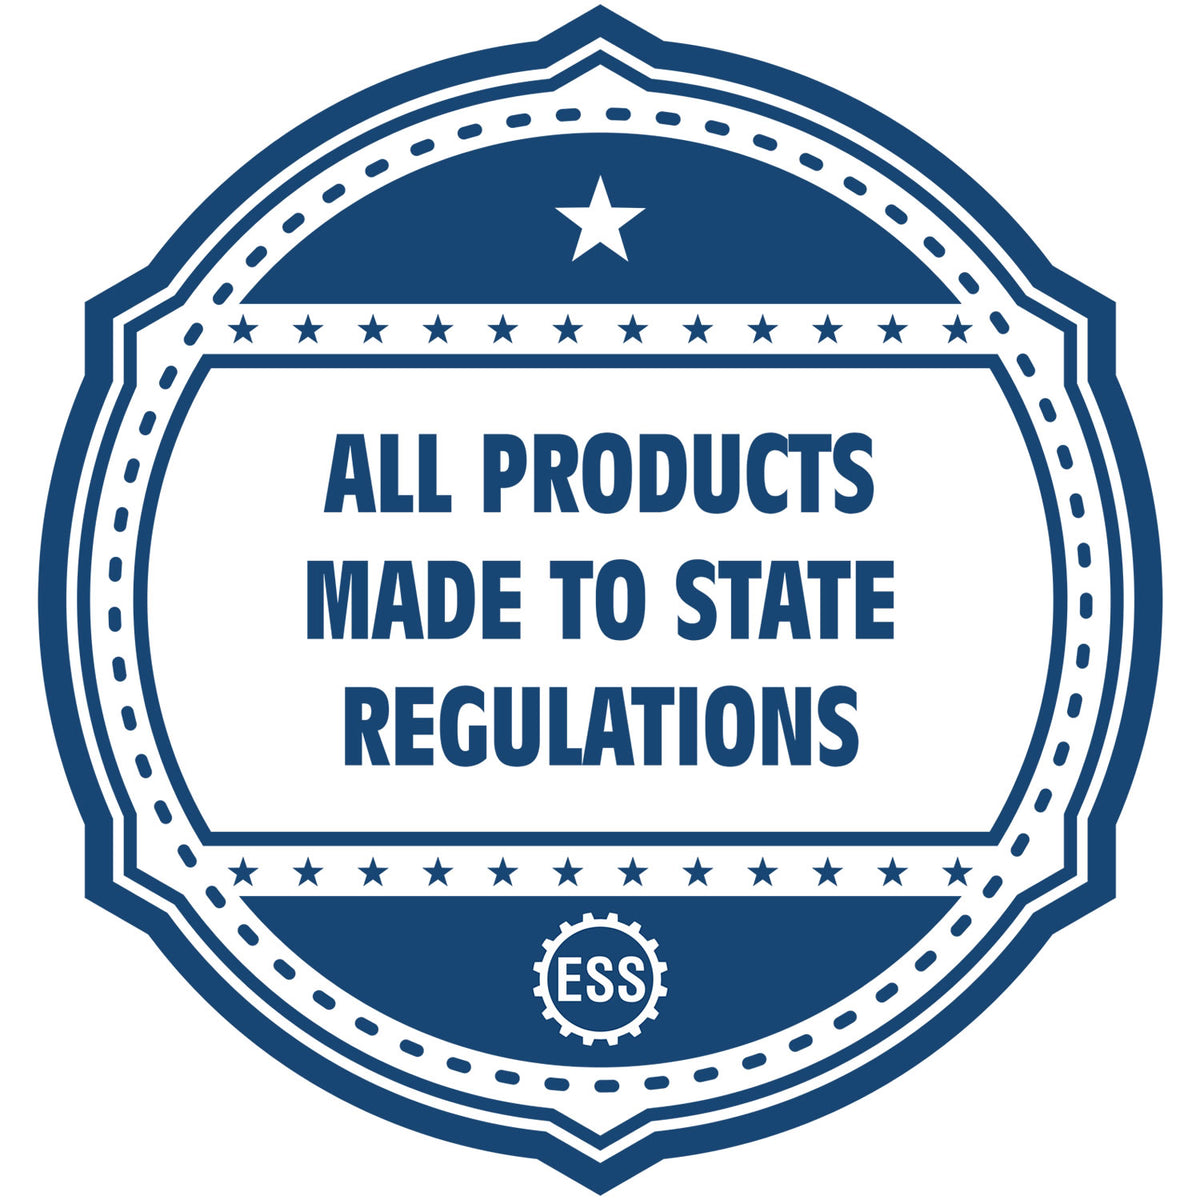 An icon or badge element for the Soft Michigan Professional Engineer Seal showing that this product is made in compliance with state regulations.